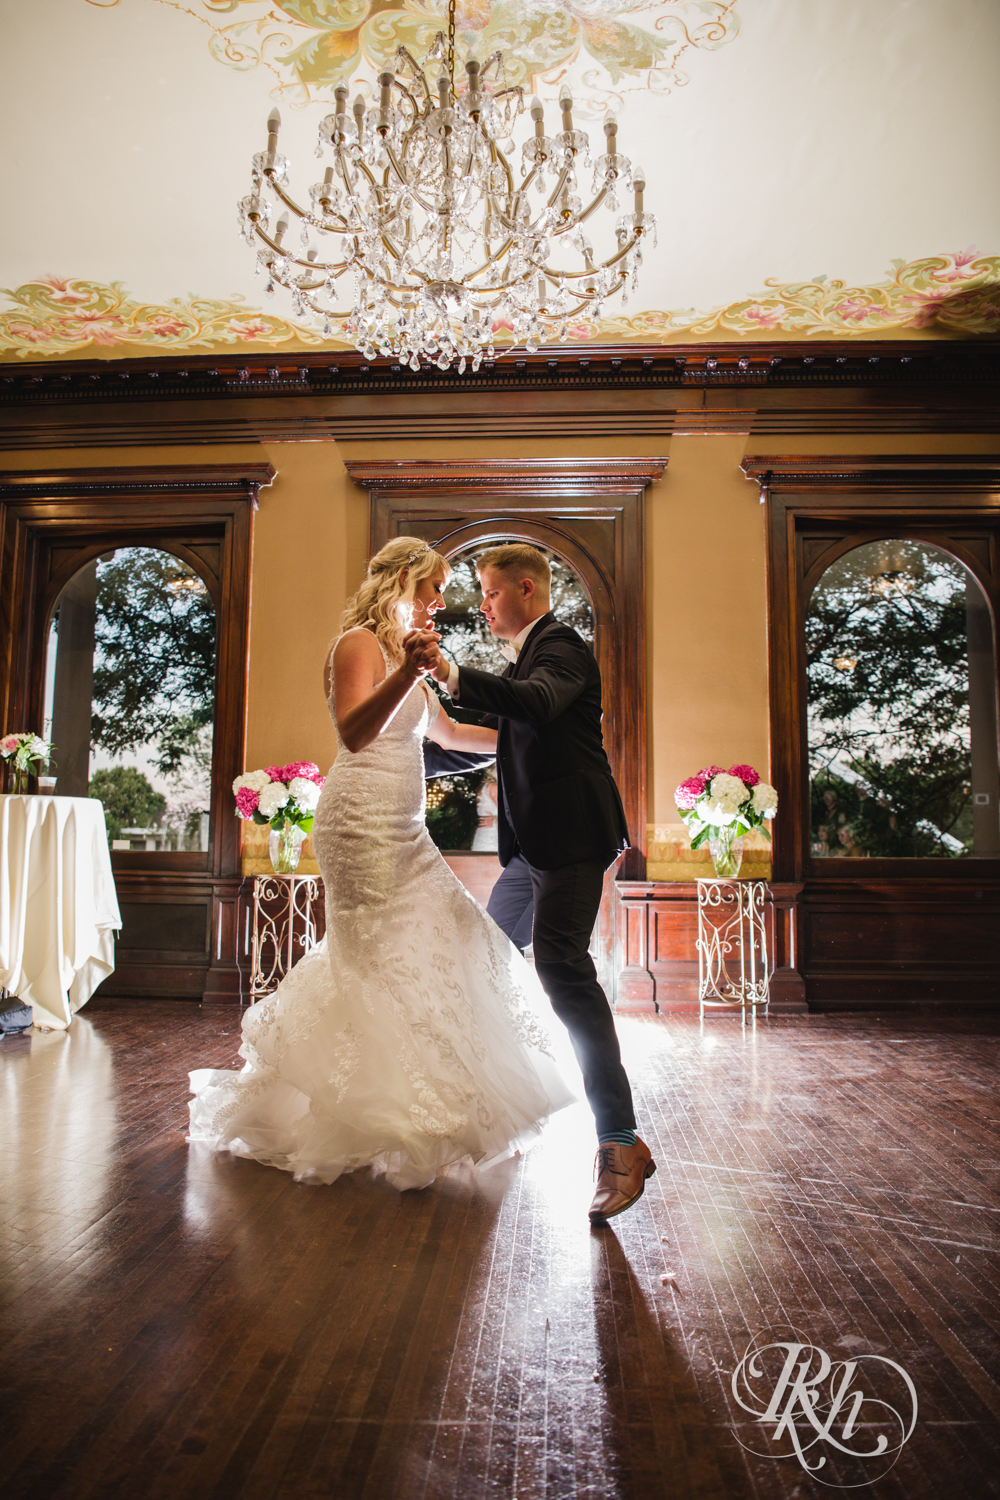 Bride and groom dance during wedding reception at the Semple Mansion in Minneapolis, Minnesota.